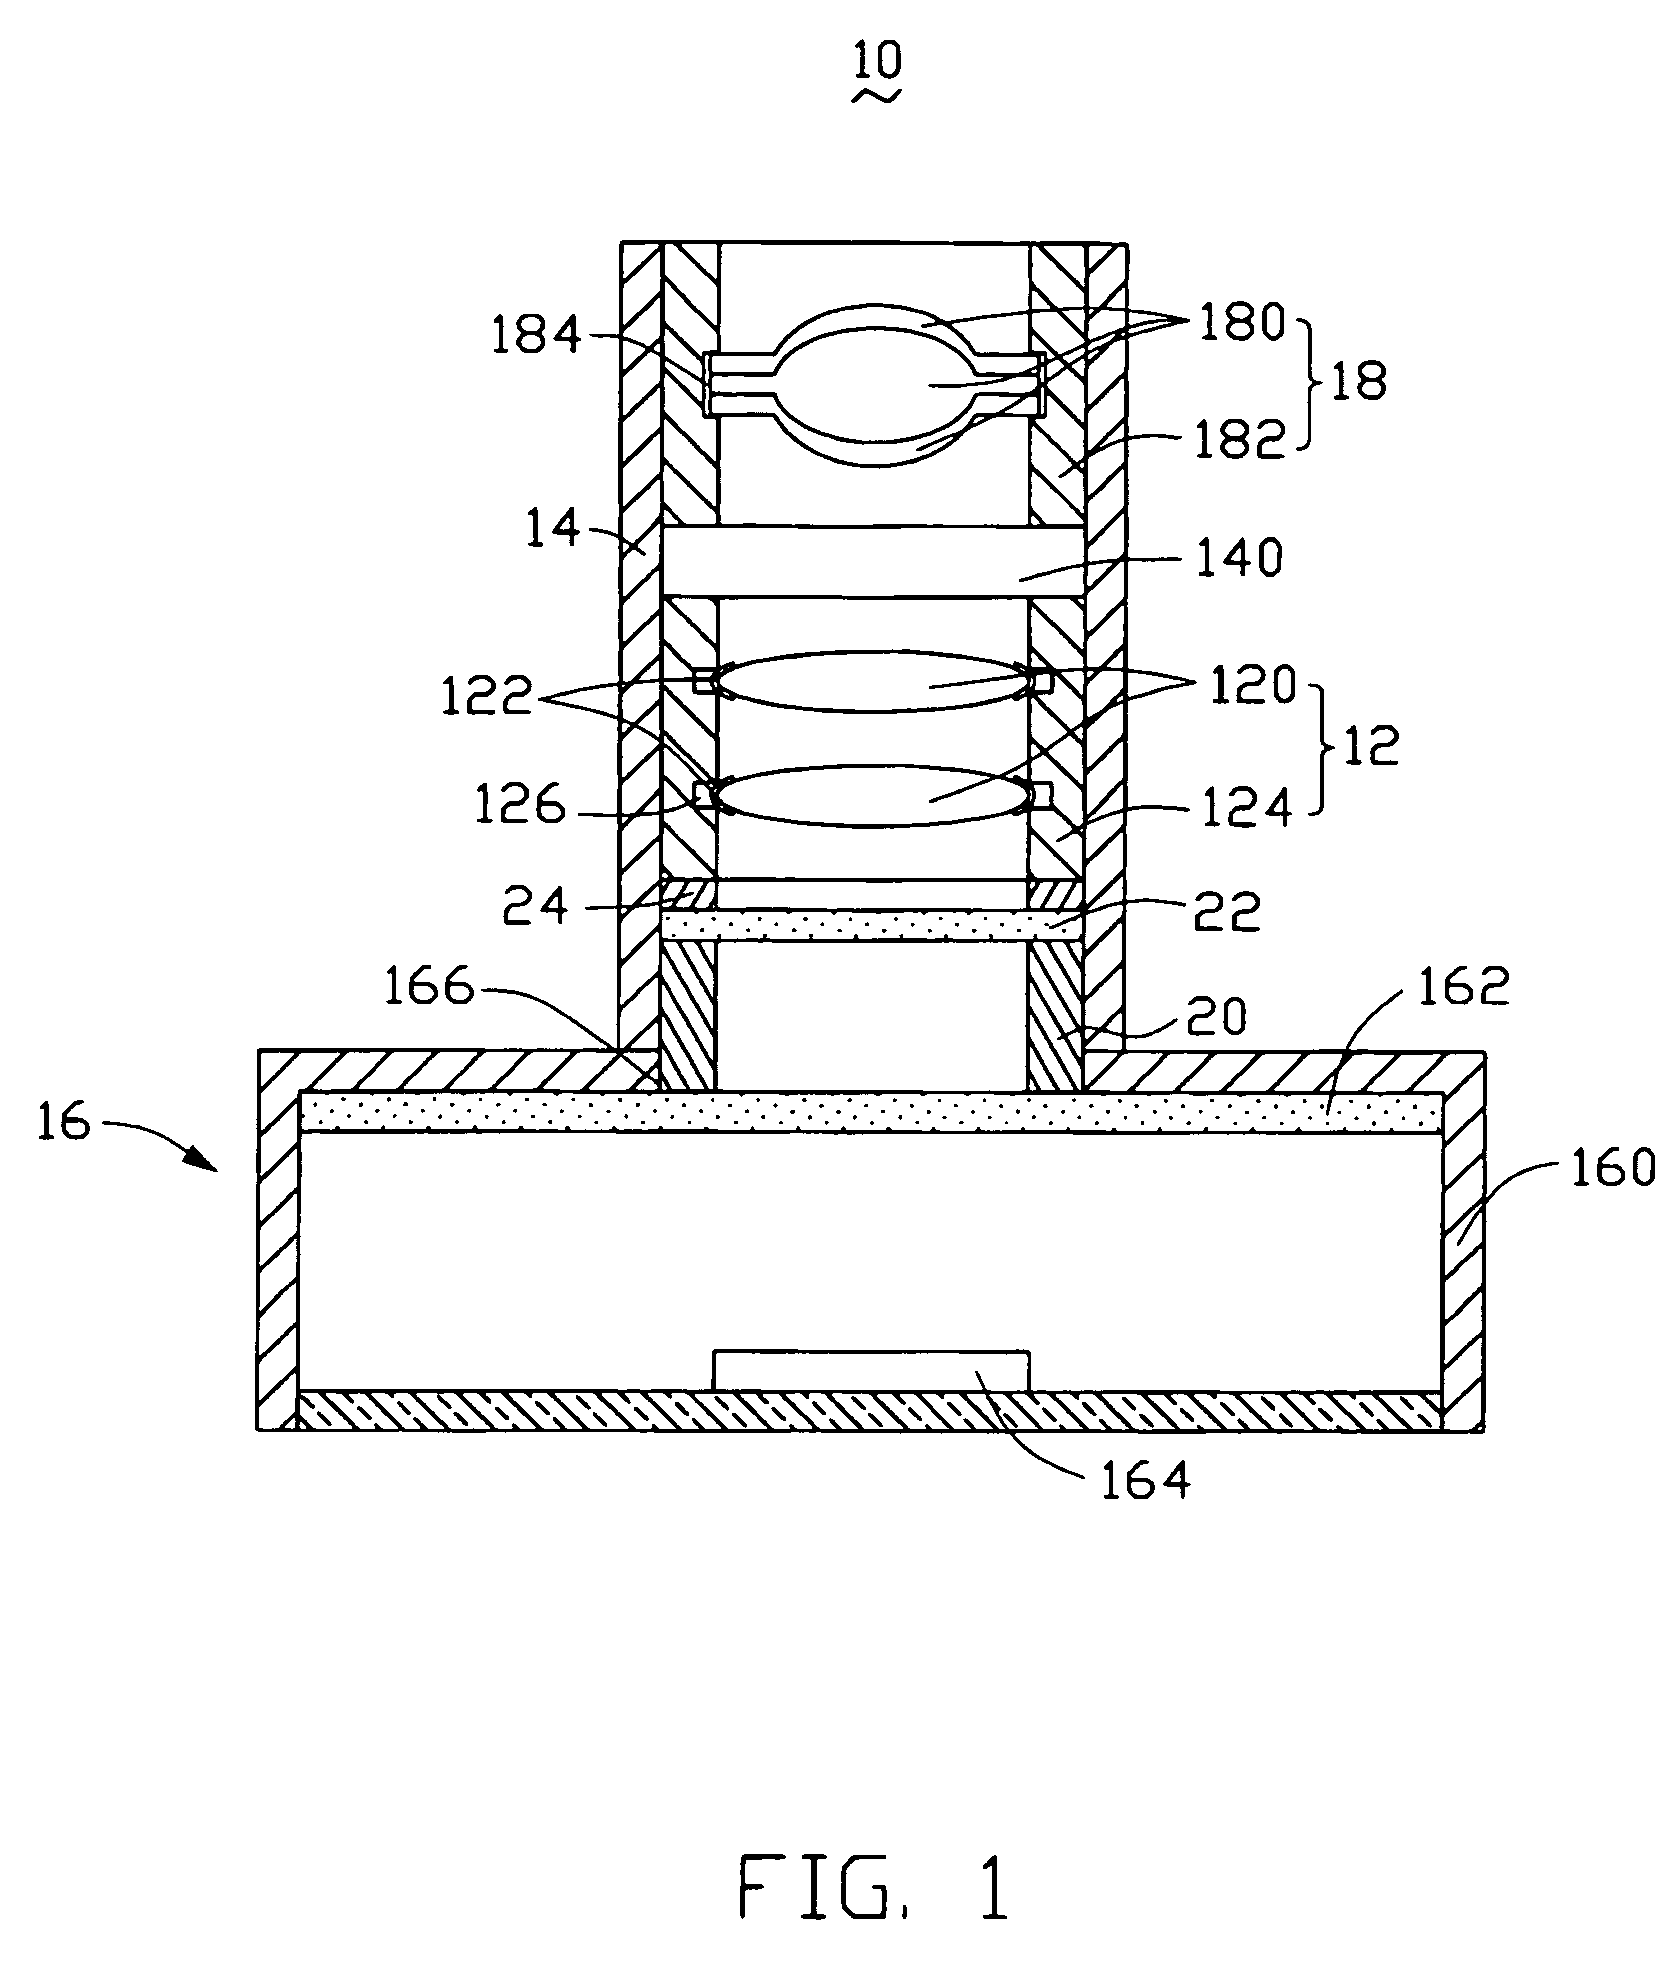 Optical system having lenses with adjustable focal length